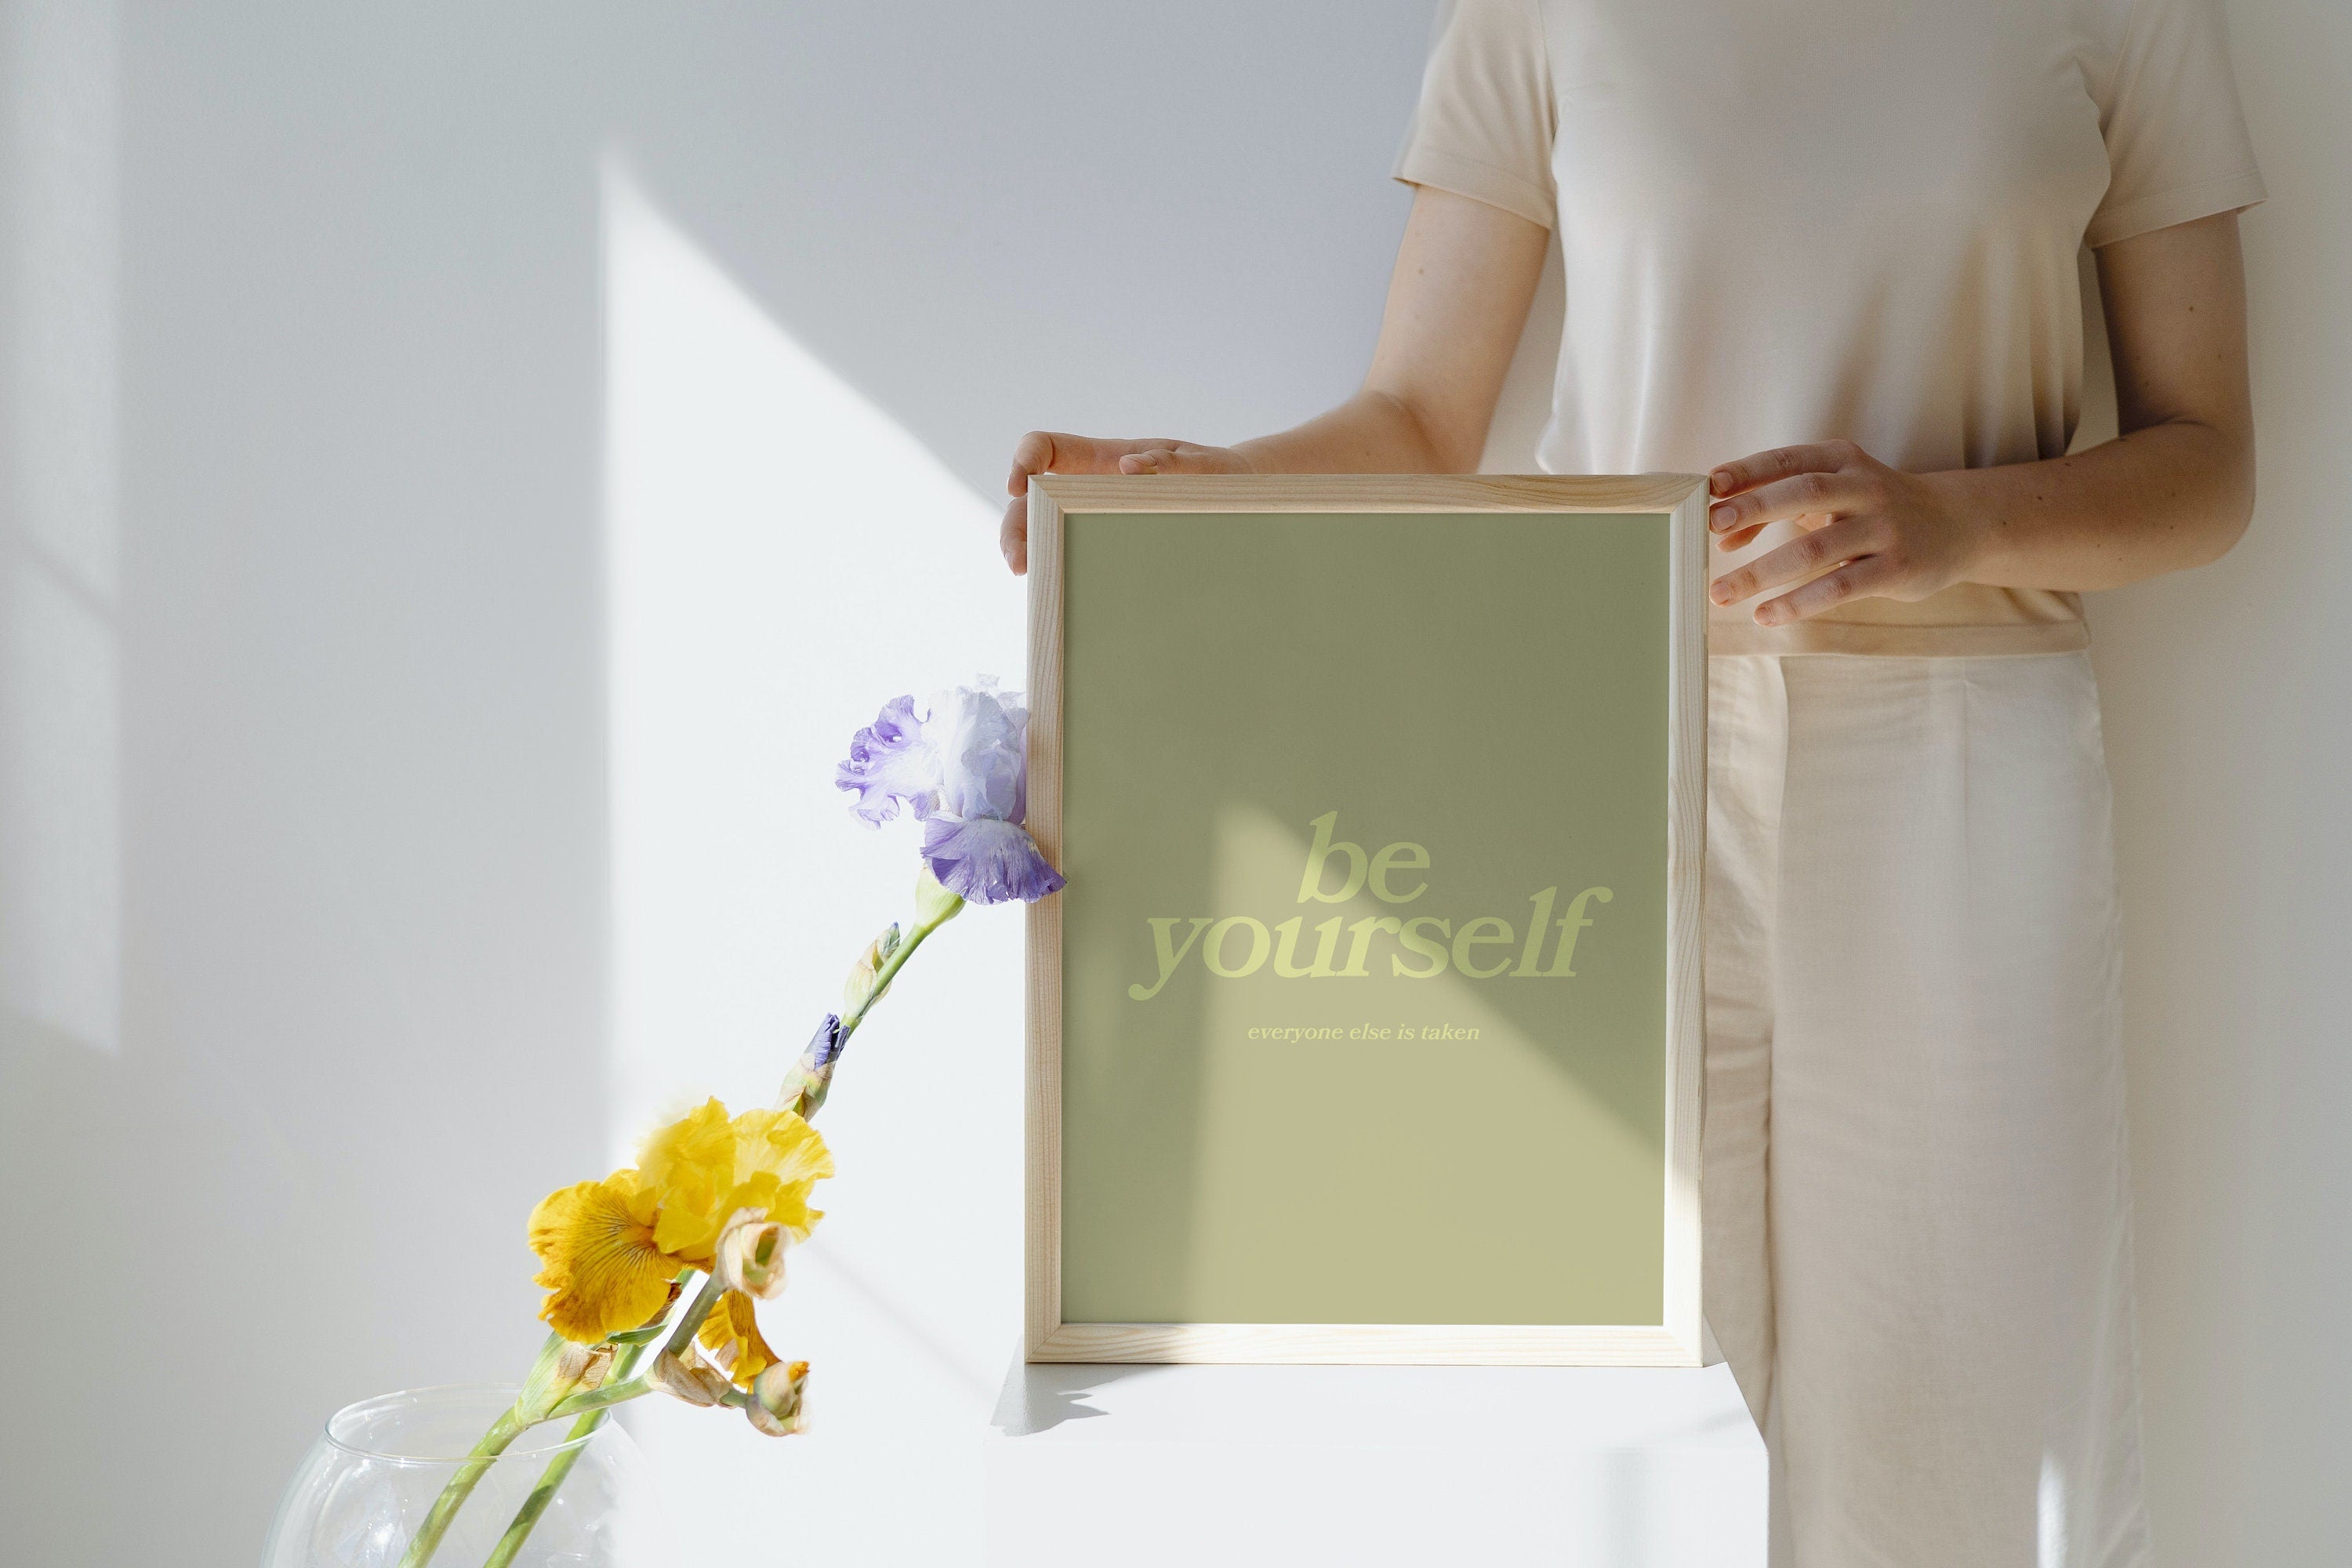 "Inspire self-expression with the 'Be Yourself' Digital Art Print, a bold statement piece for any room that encourages authenticity.